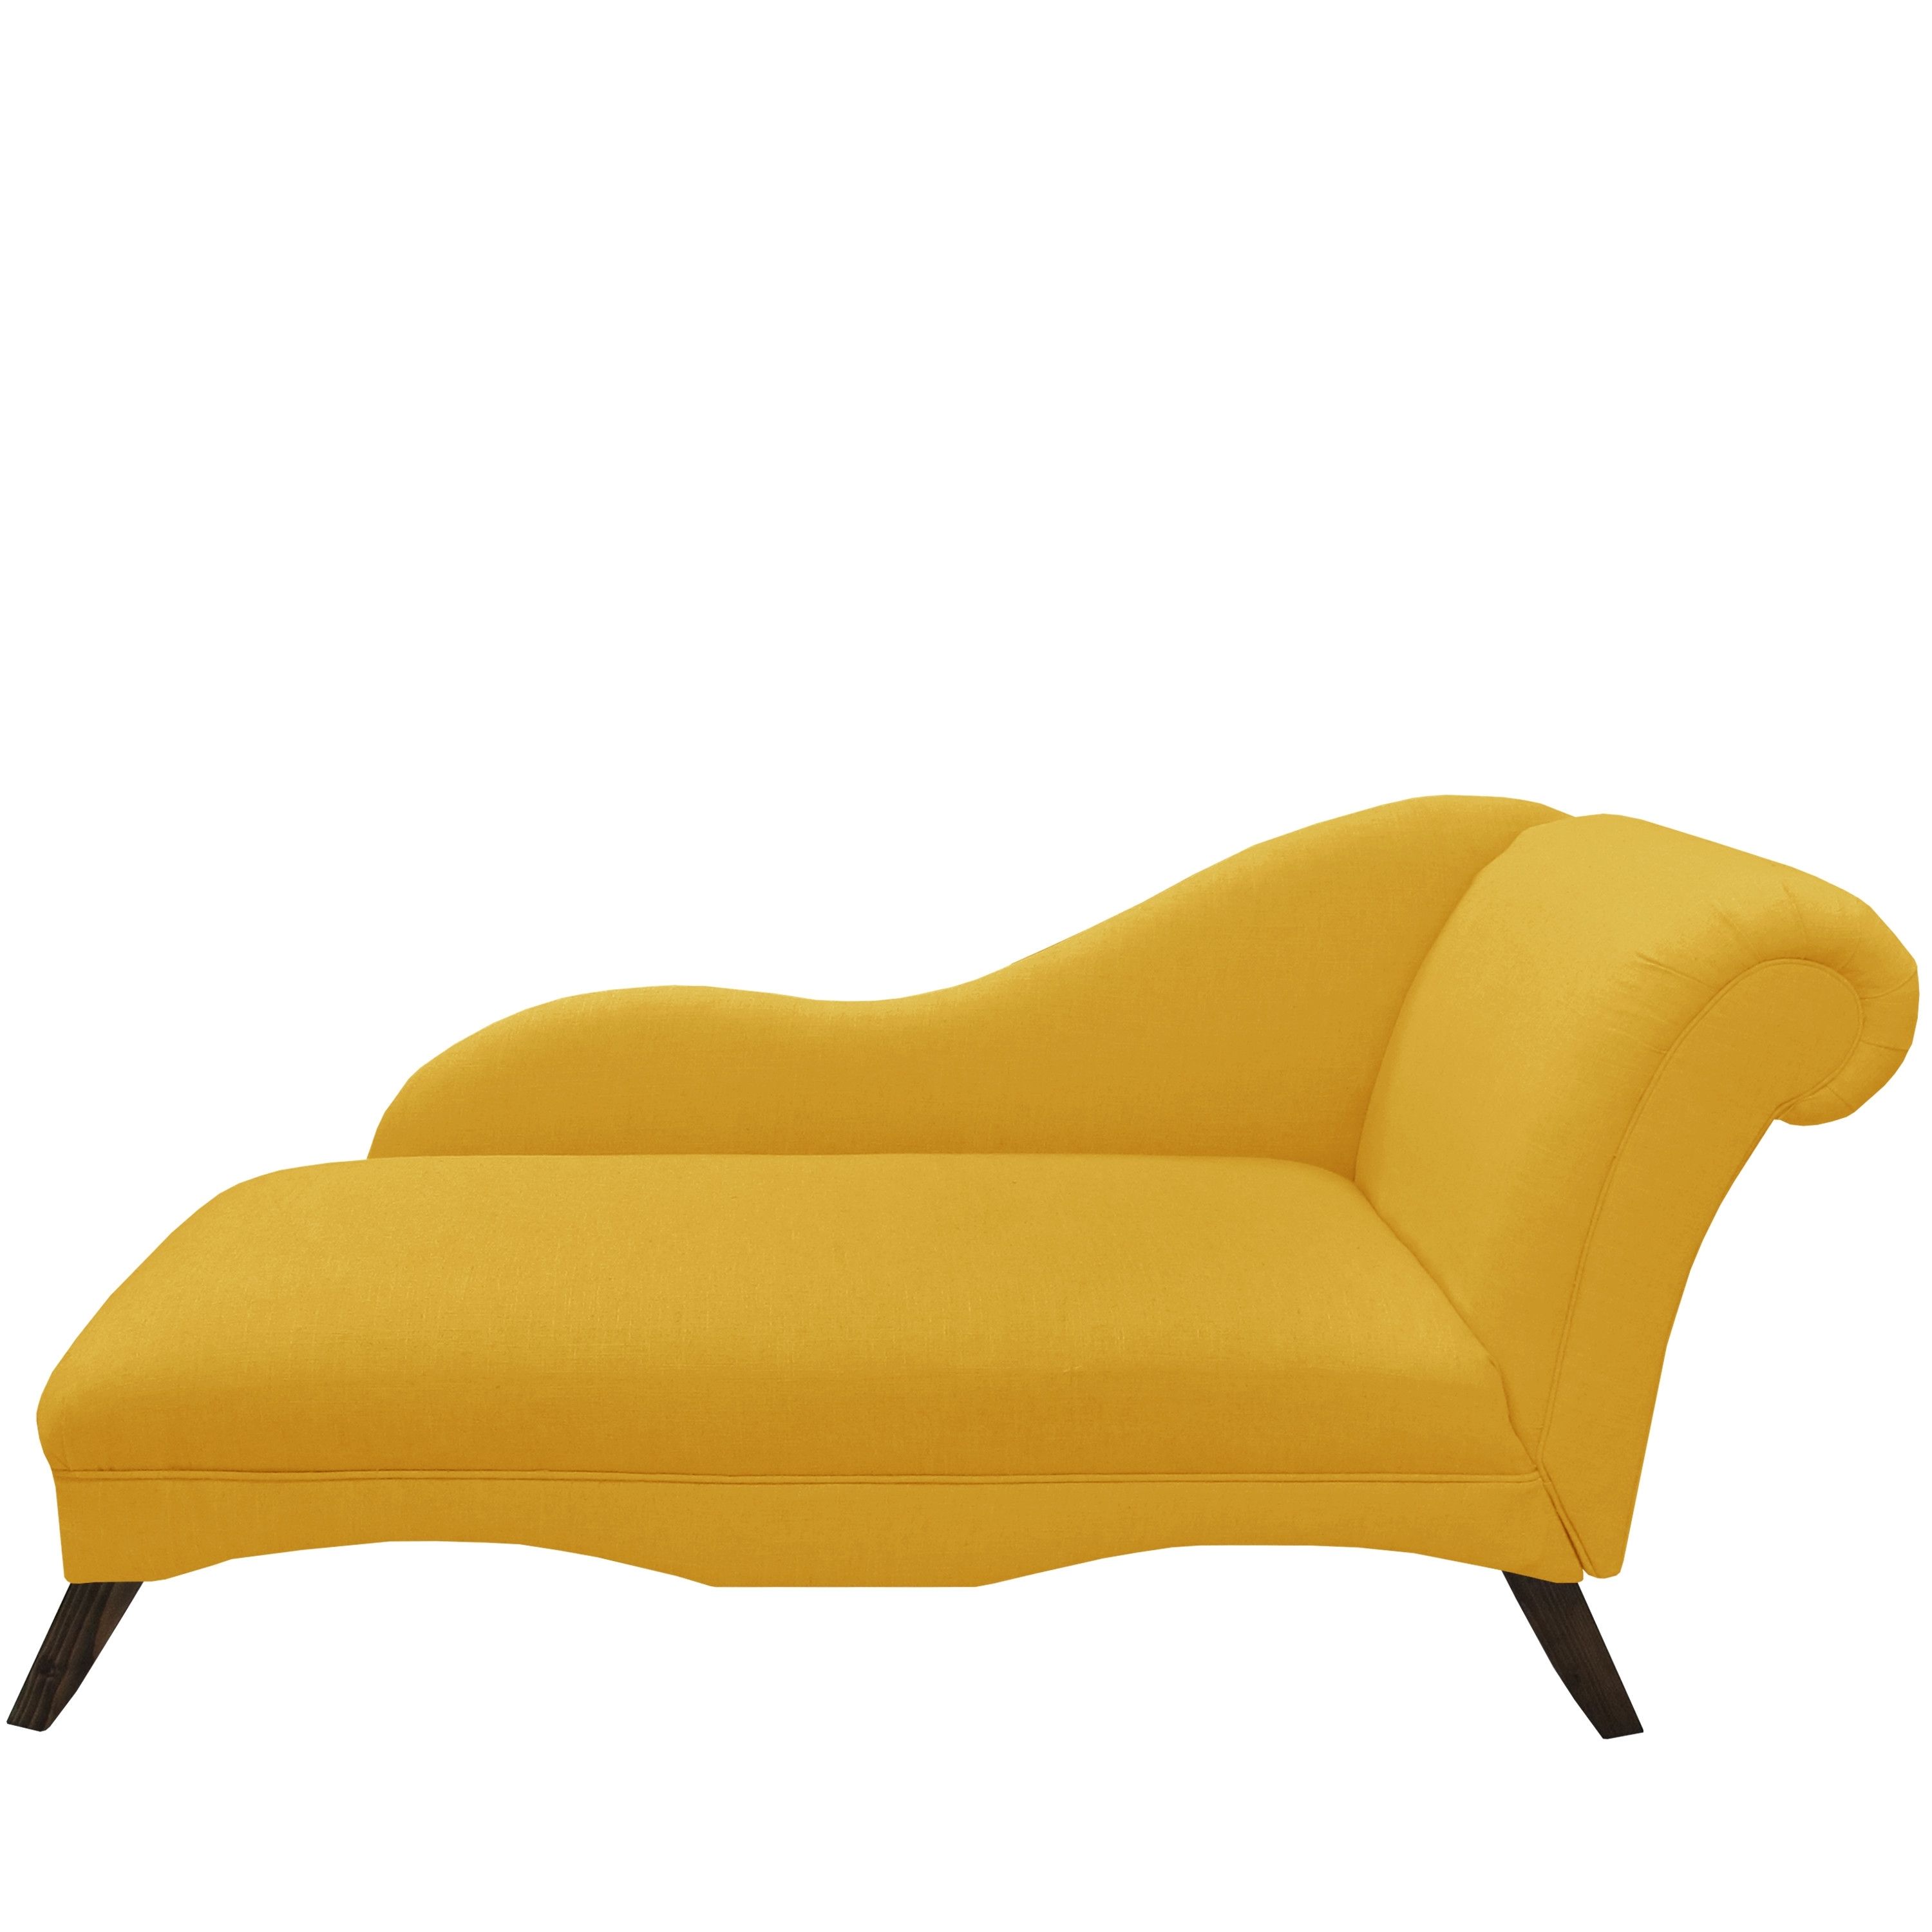 Favorite Yellow Chaise Lounges Intended For Nonsensical Modern Chaise – Home Designing (View 15 of 15)